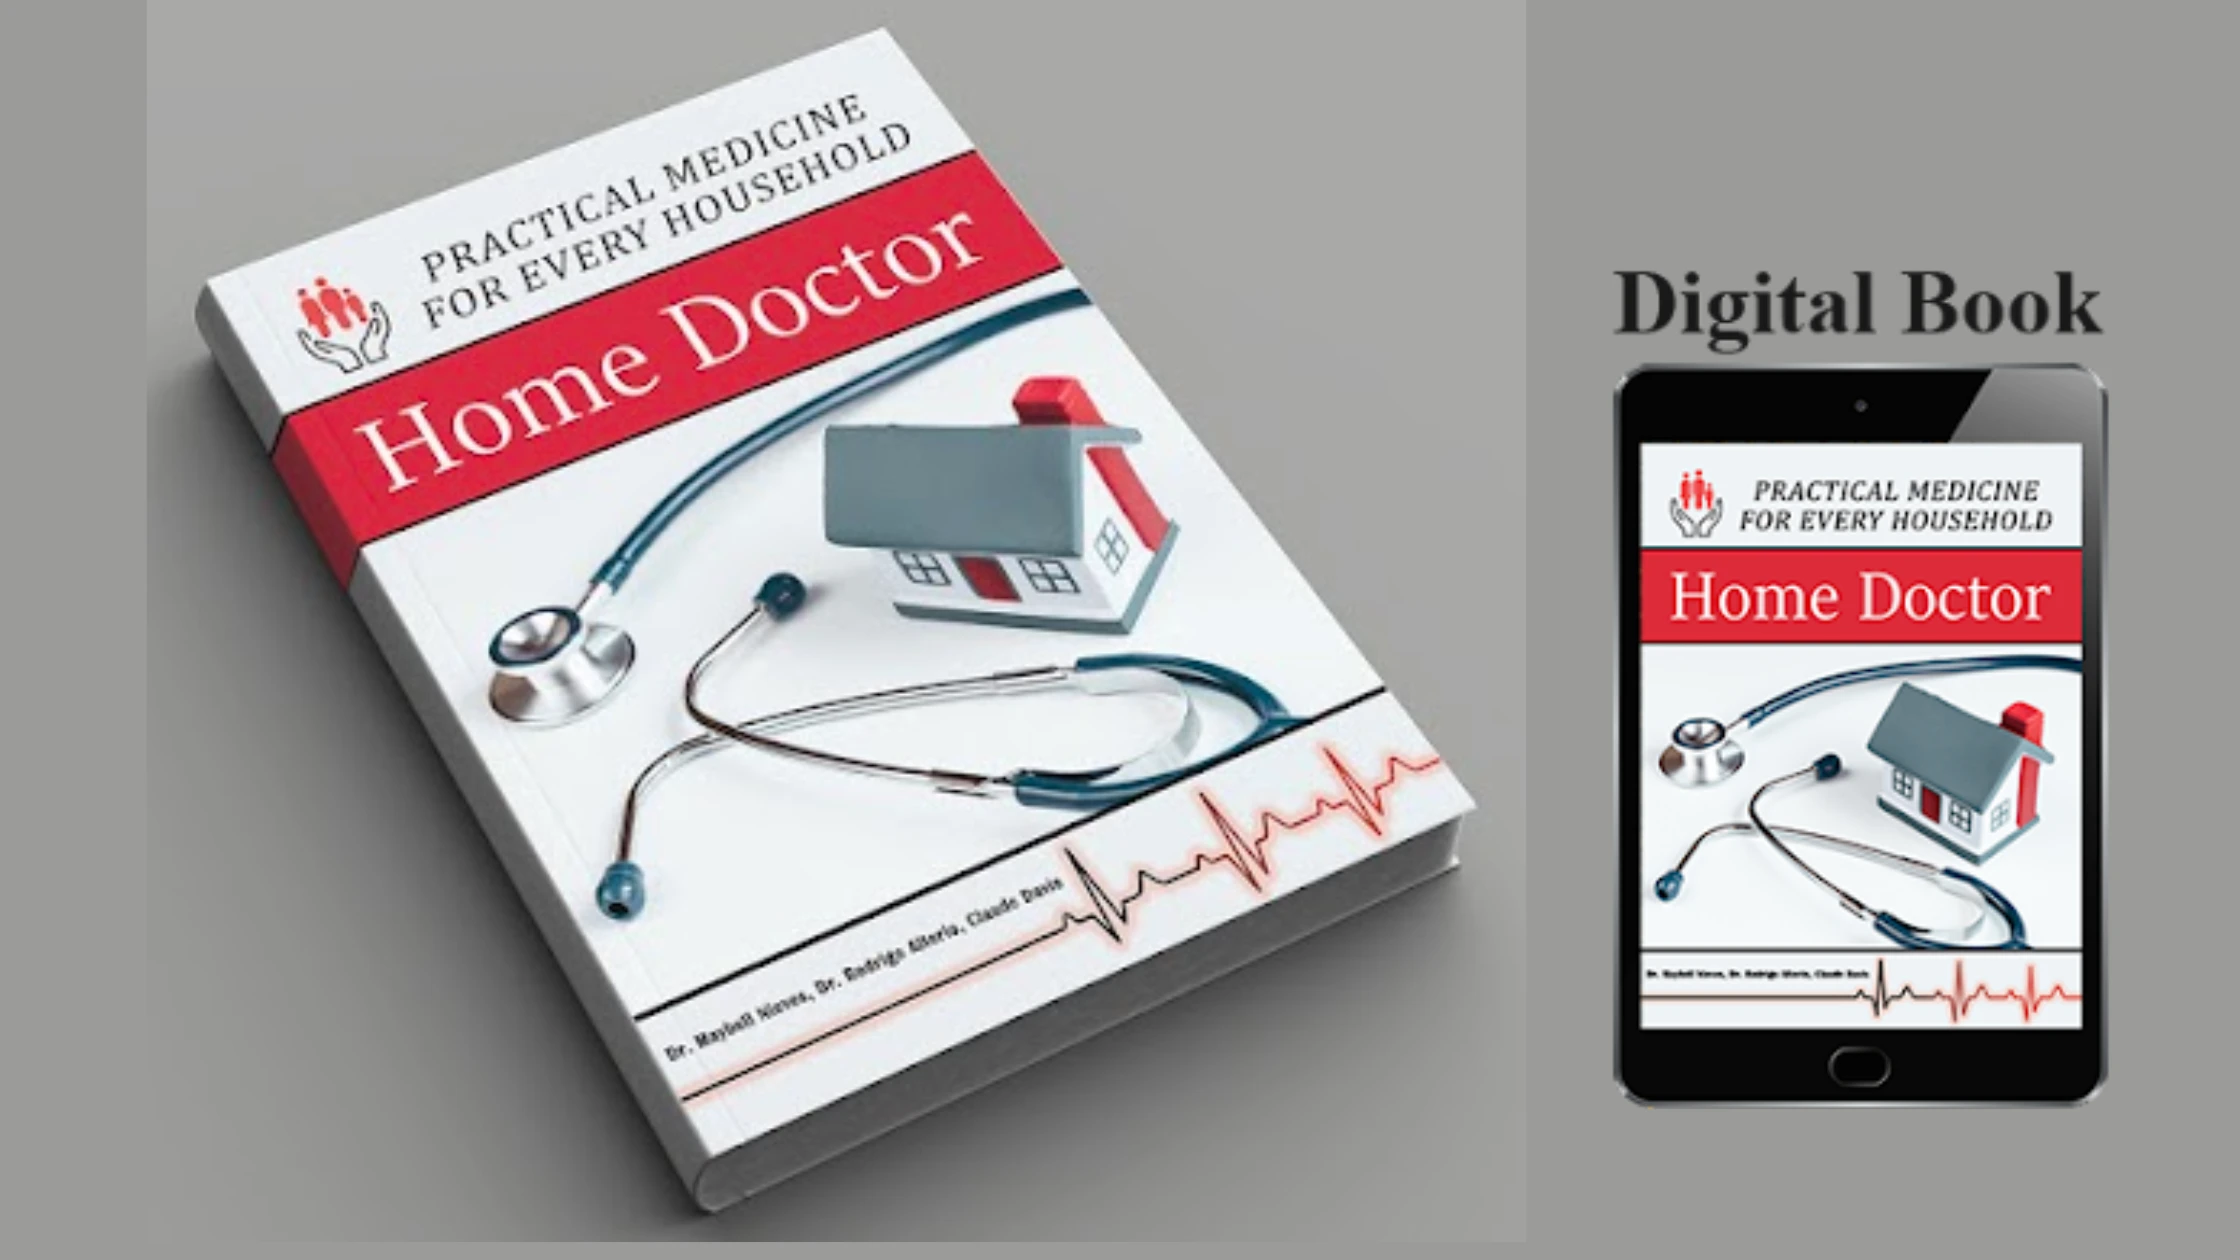 The Home Doctor Review